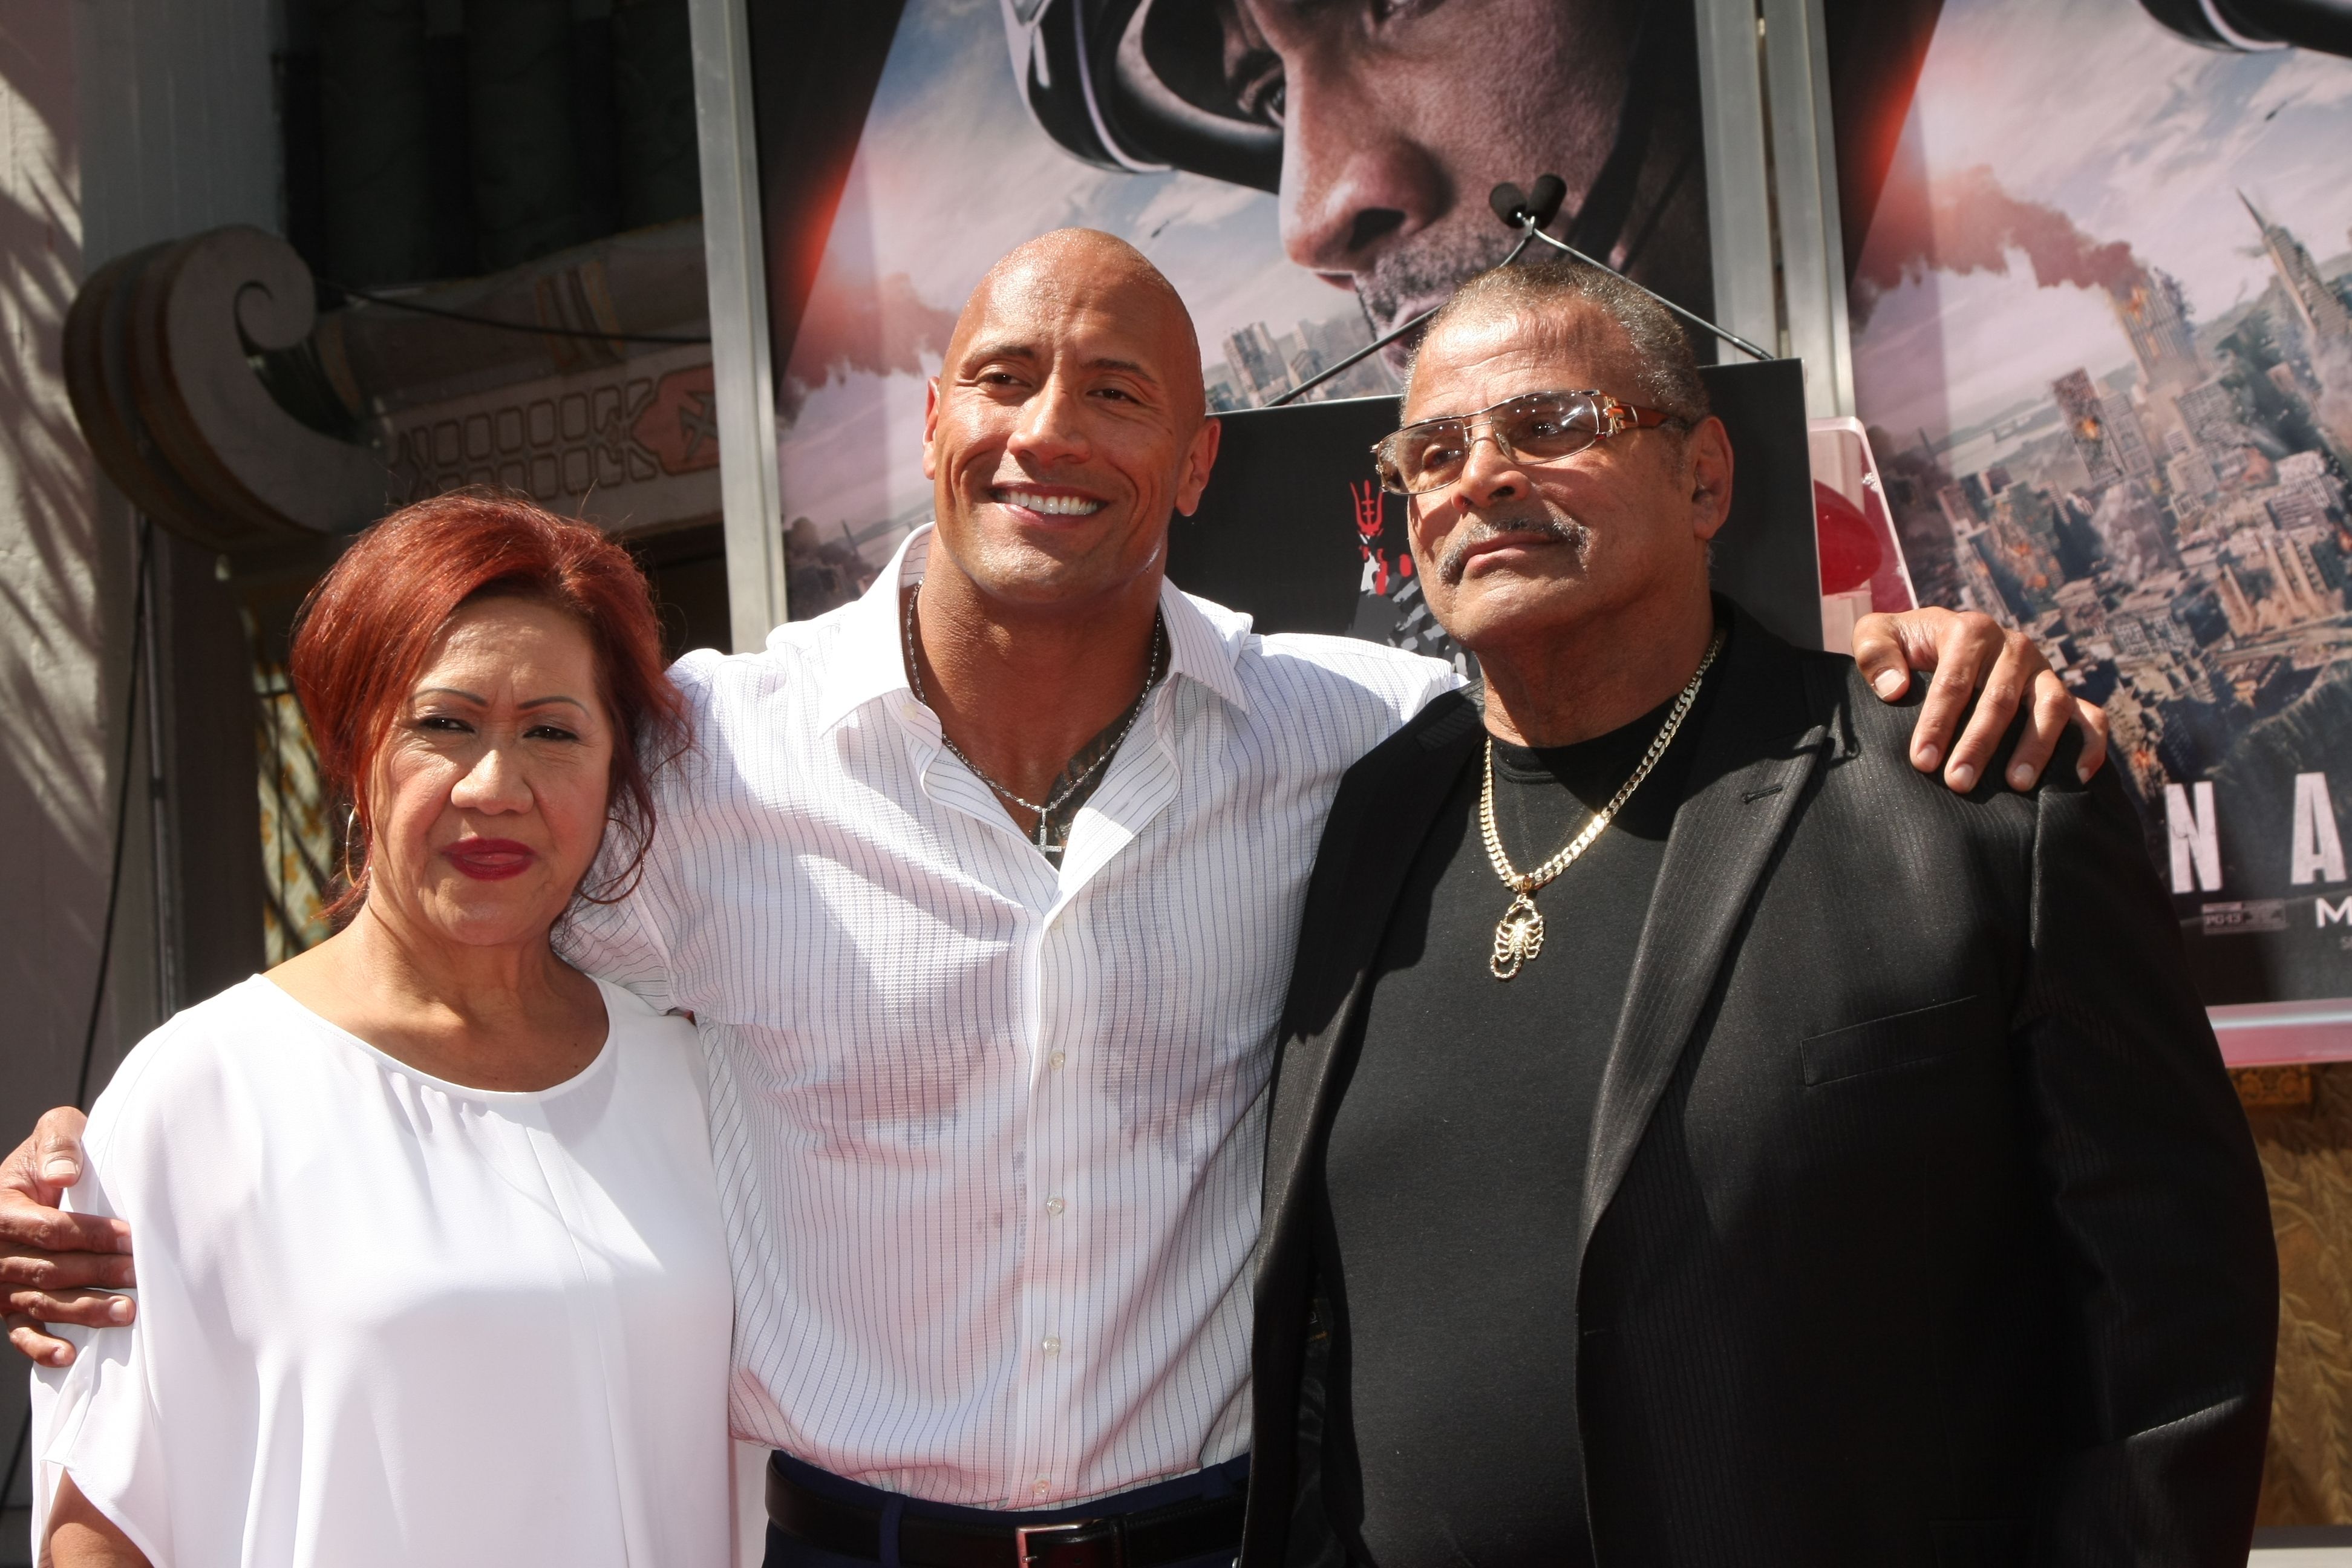 Dwayne "The Rock" Johnson at a movie premiere with his parents | Photo: Getty Images